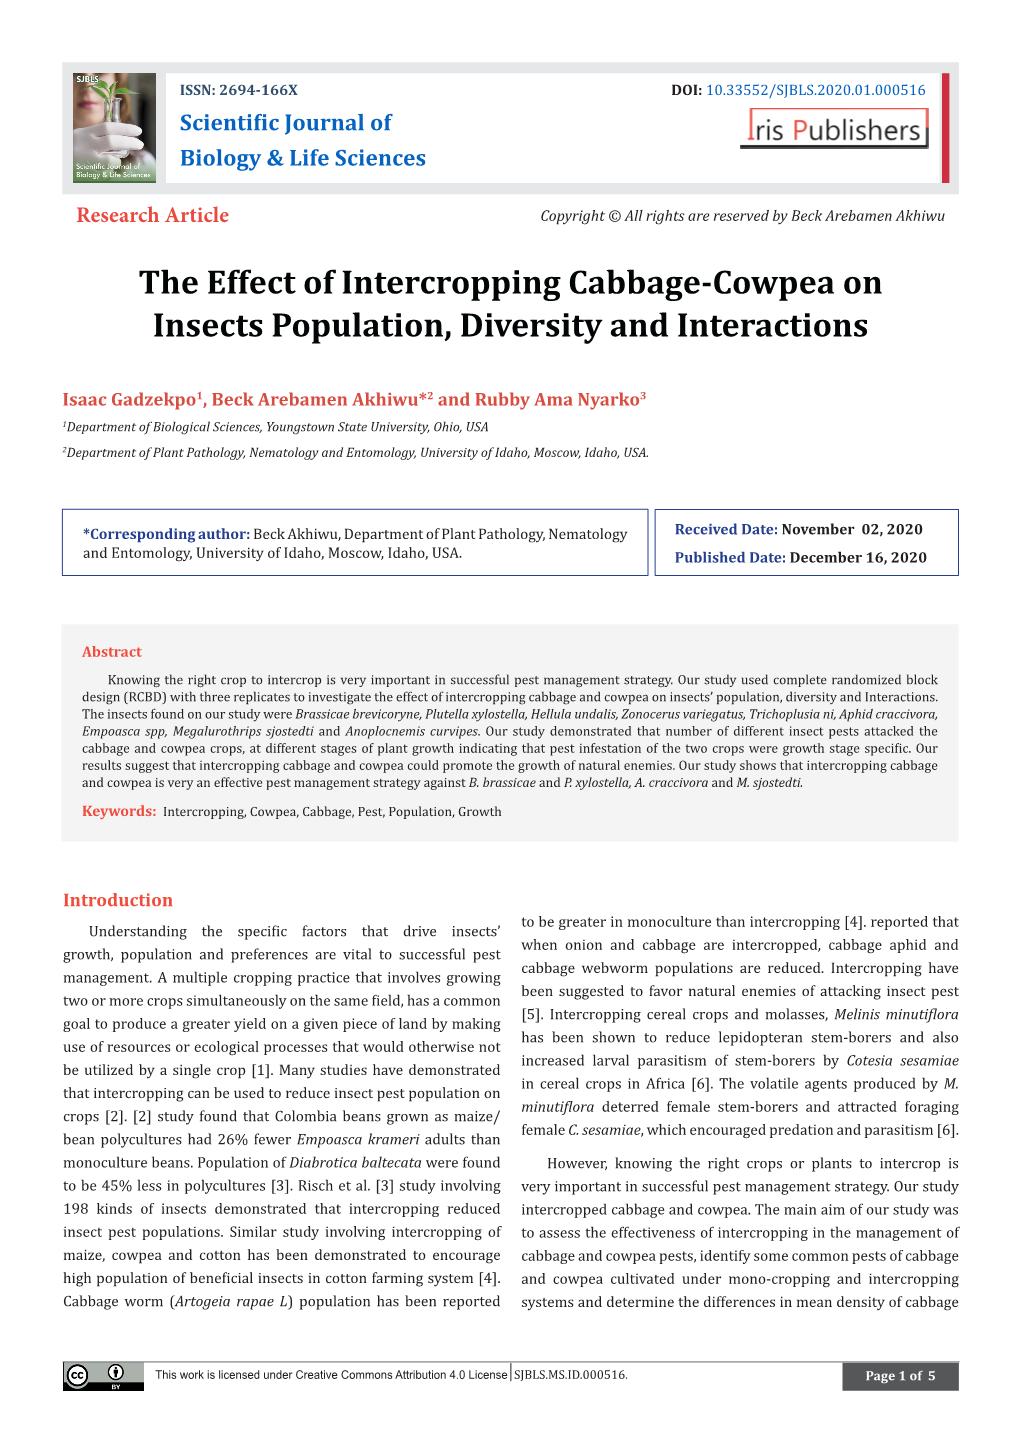 The Effect of Intercropping Cabbage-Cowpea on Insects Population, Diversity and Interactions